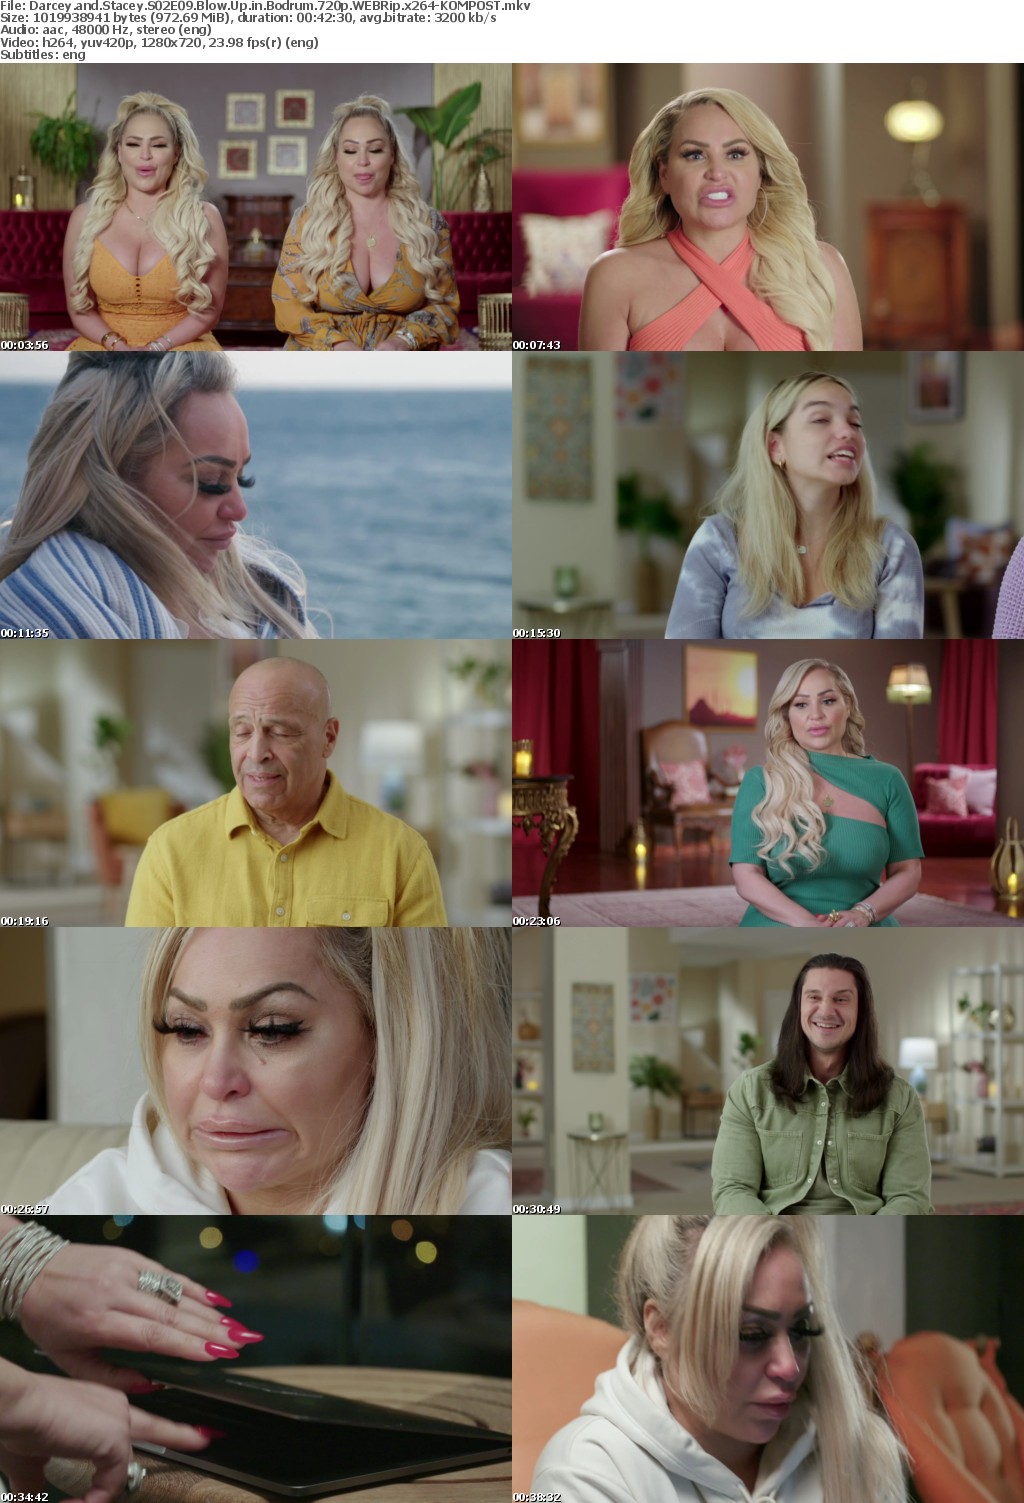 Darcey and Stacey S02E09 Blow Up in Bodrum 720p WEBRip x264-KOMPOST